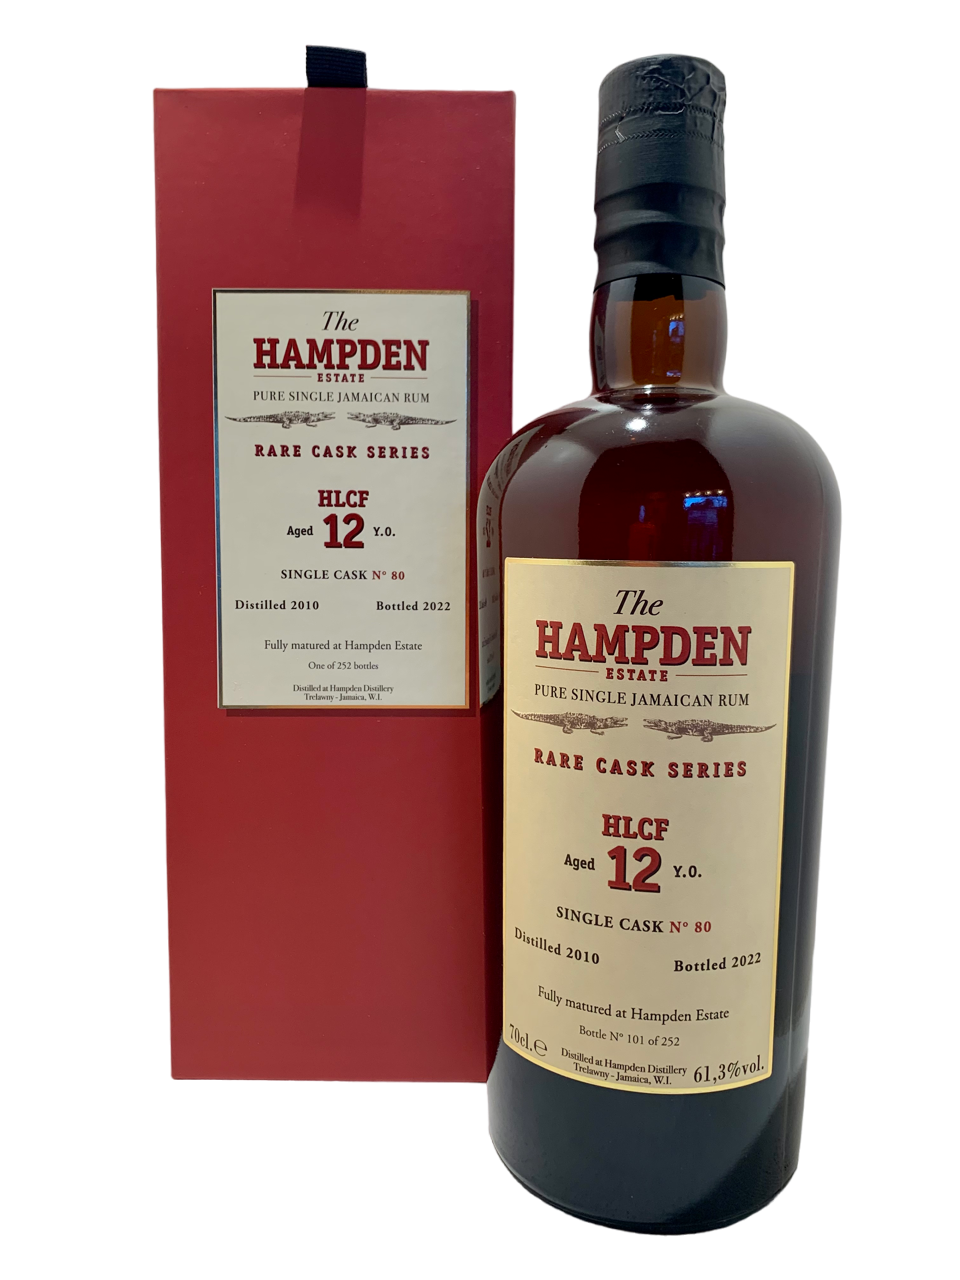 the hampden estate 12 years old hlcf rare cask series single cask n°80